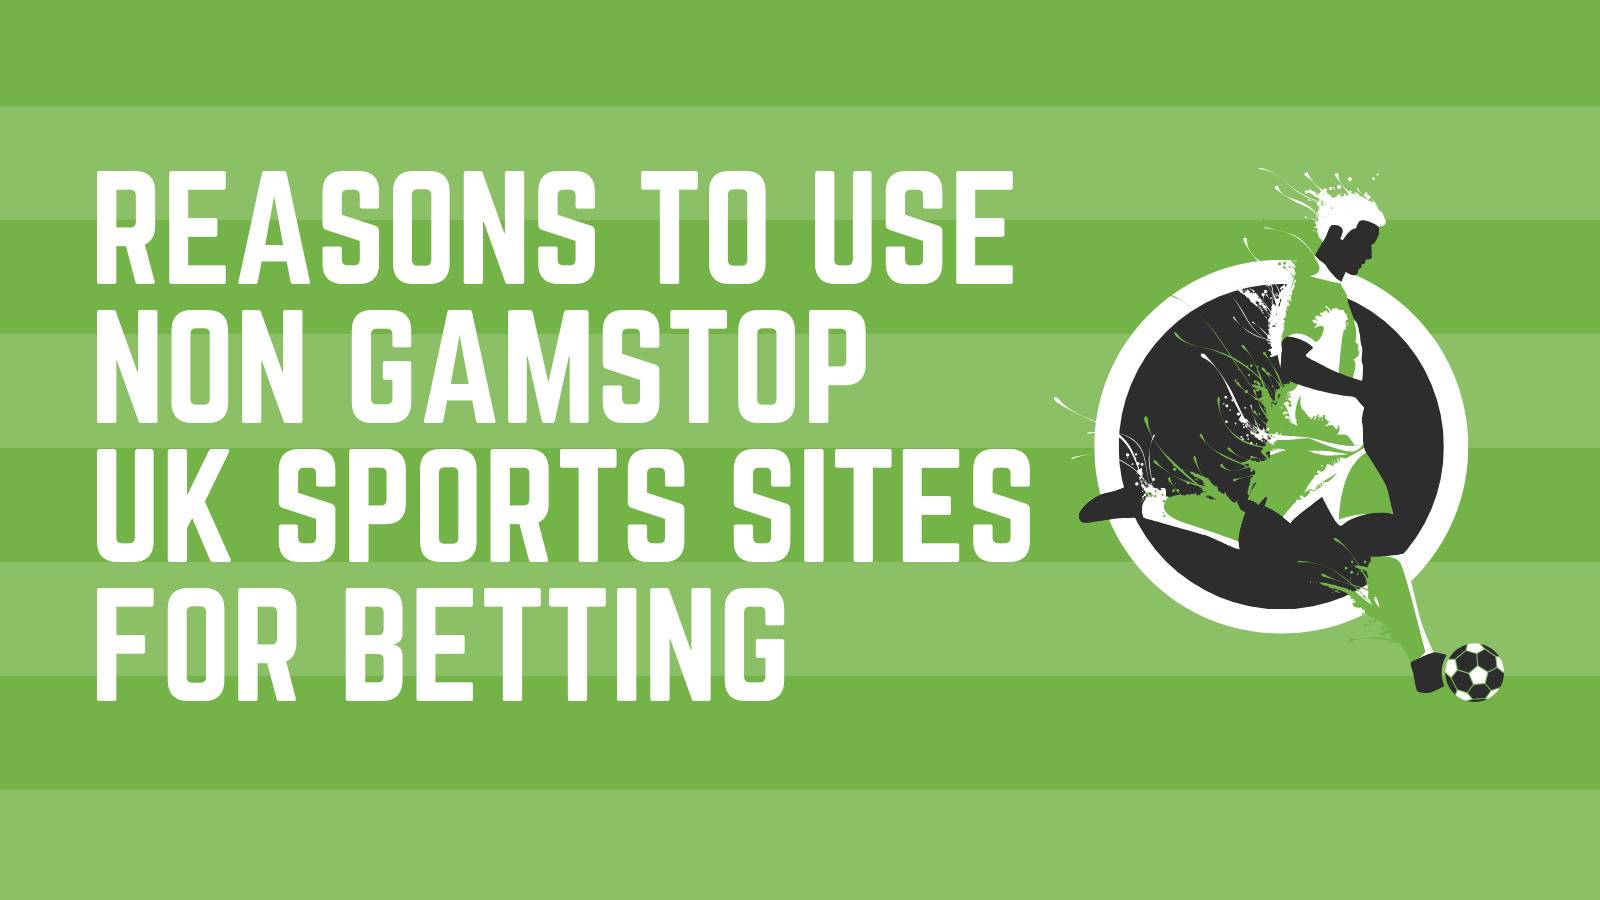 Reasons to Use Non GamStop UK Sports Sites for Betting - Exclude from MSN